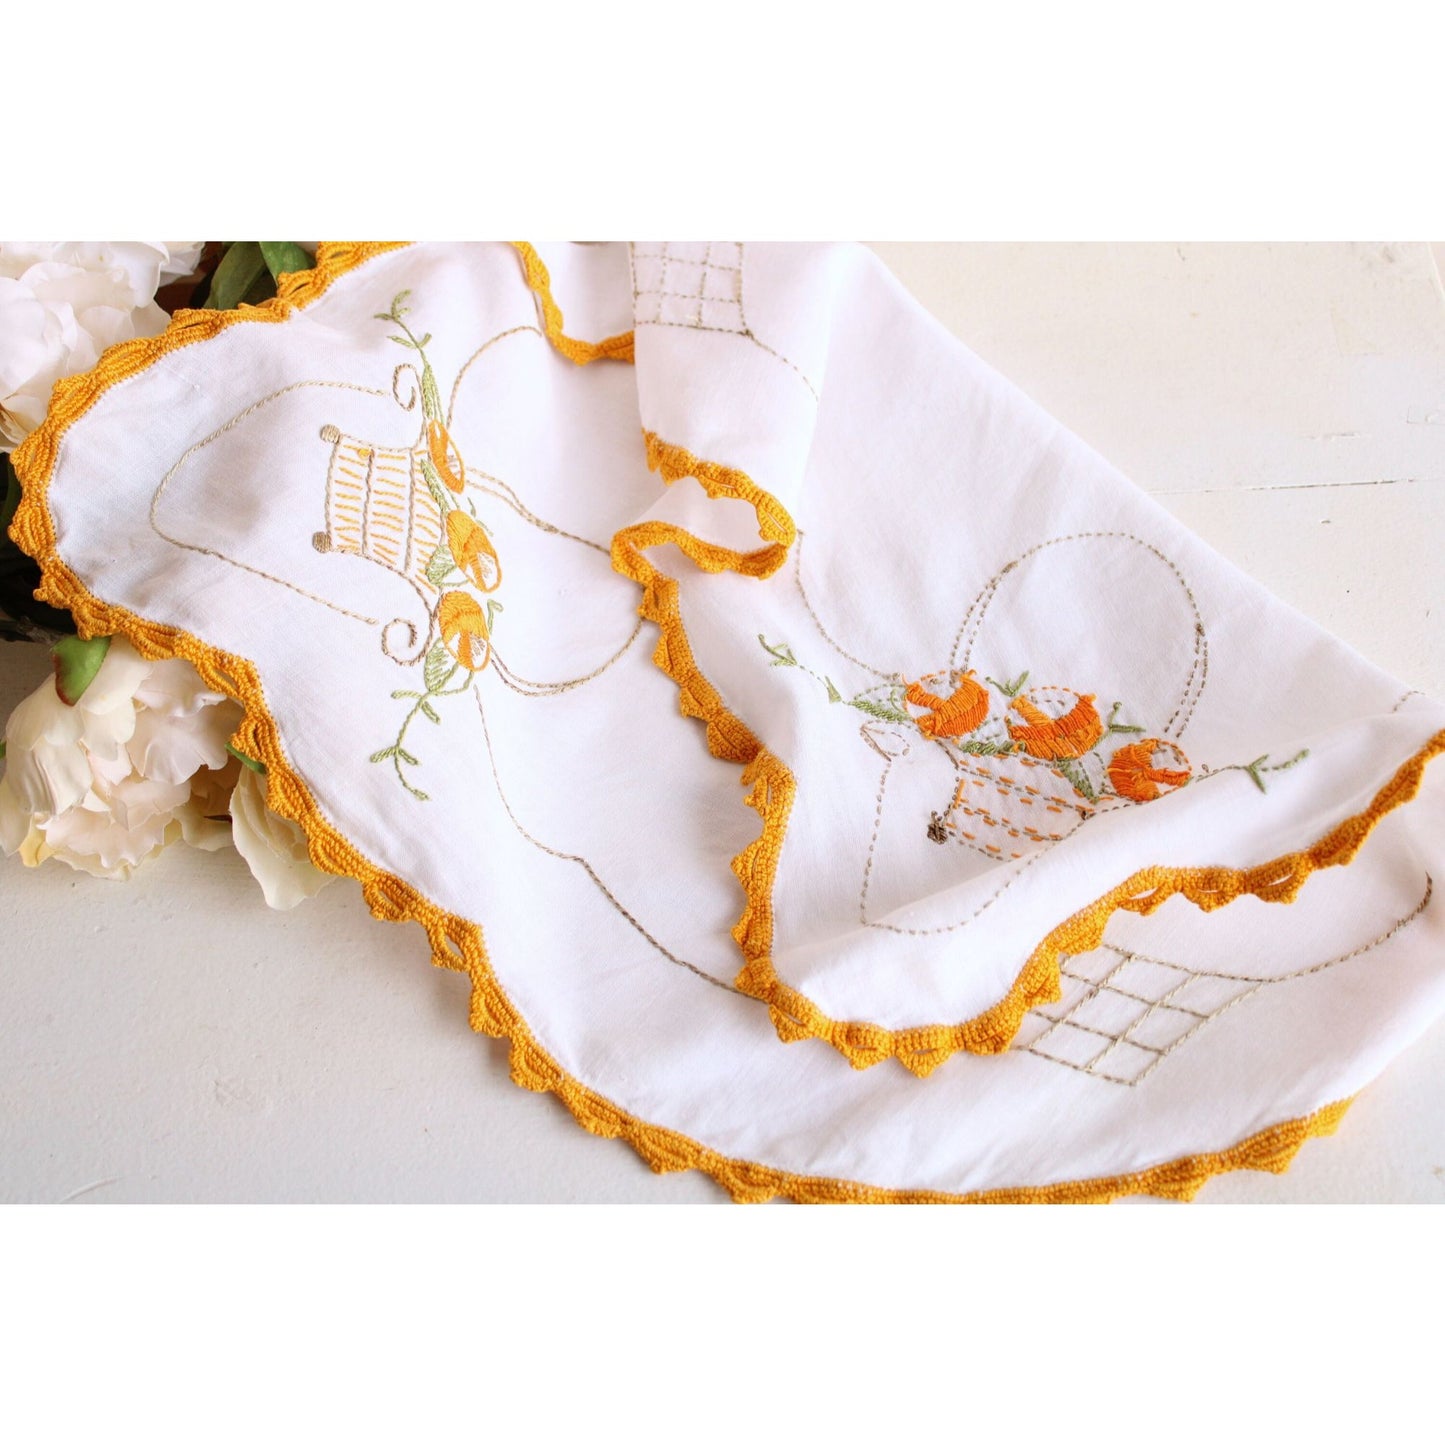 Vintage 1960s White Linen Embroidered Doily or Small Tablecloth